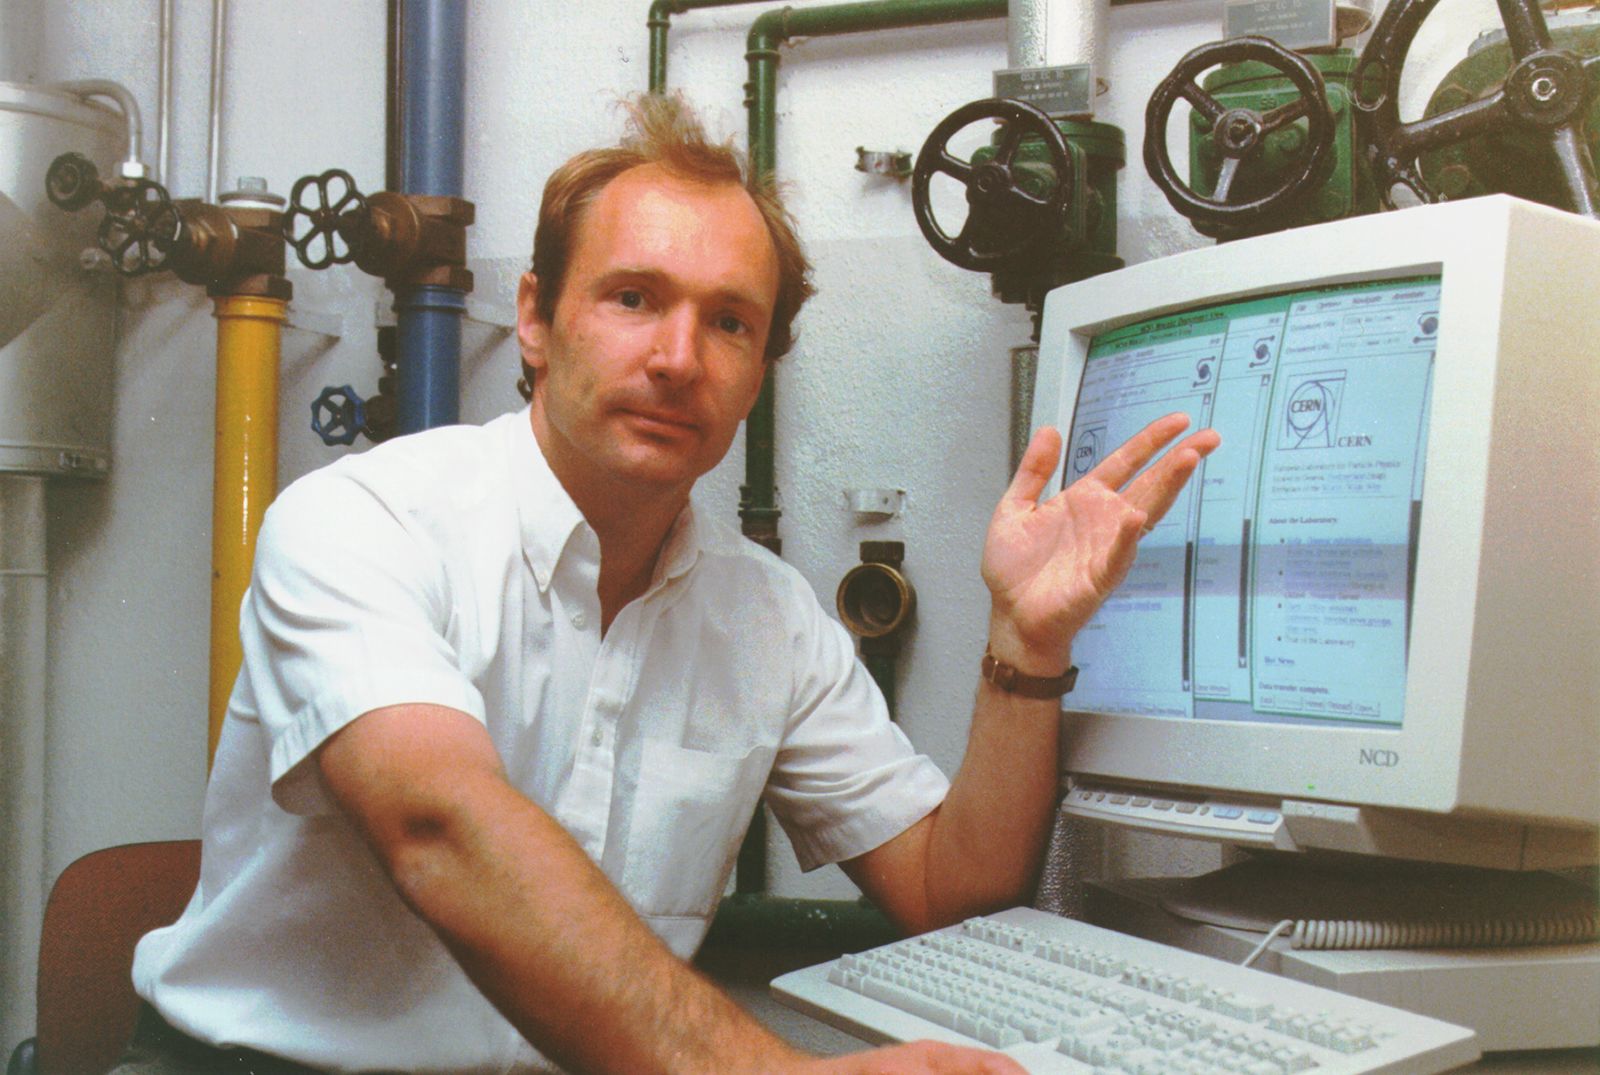 The World Wide Web's inventor sold its original code for $5.4 million